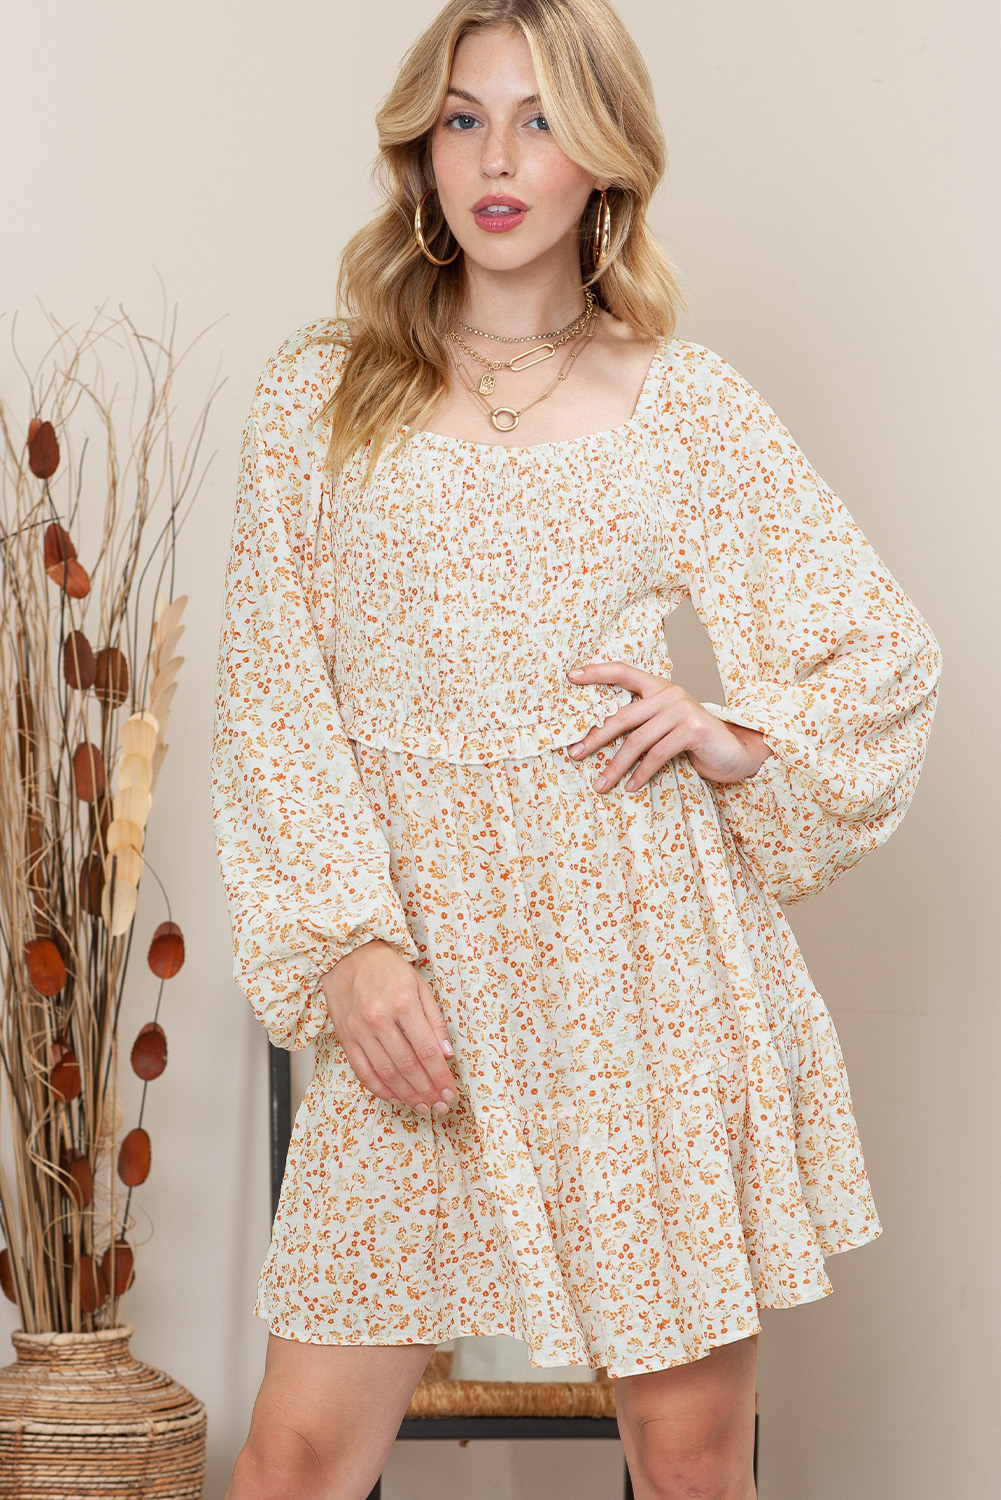 Shewin Wholesale Apparel Apricot Boho Floral Smocked Puff Sleeve Short DRESS